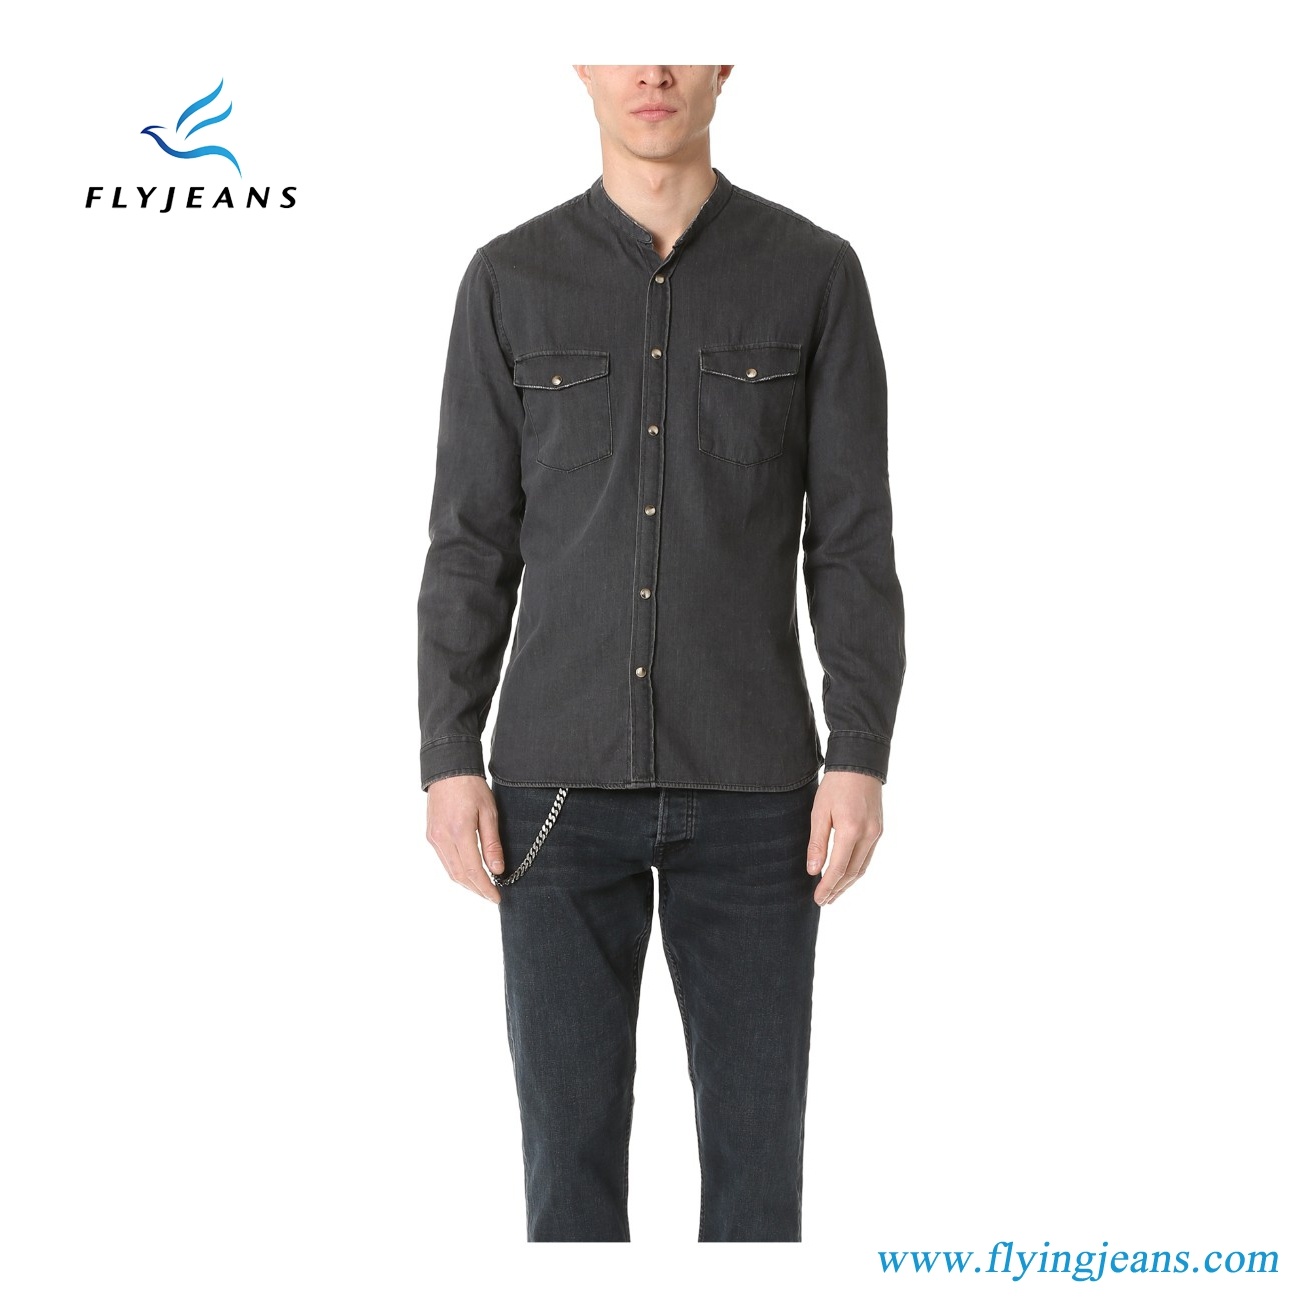 New Syle Collarless Imitation of The Old Black Denim Shirts by Fly Jeans